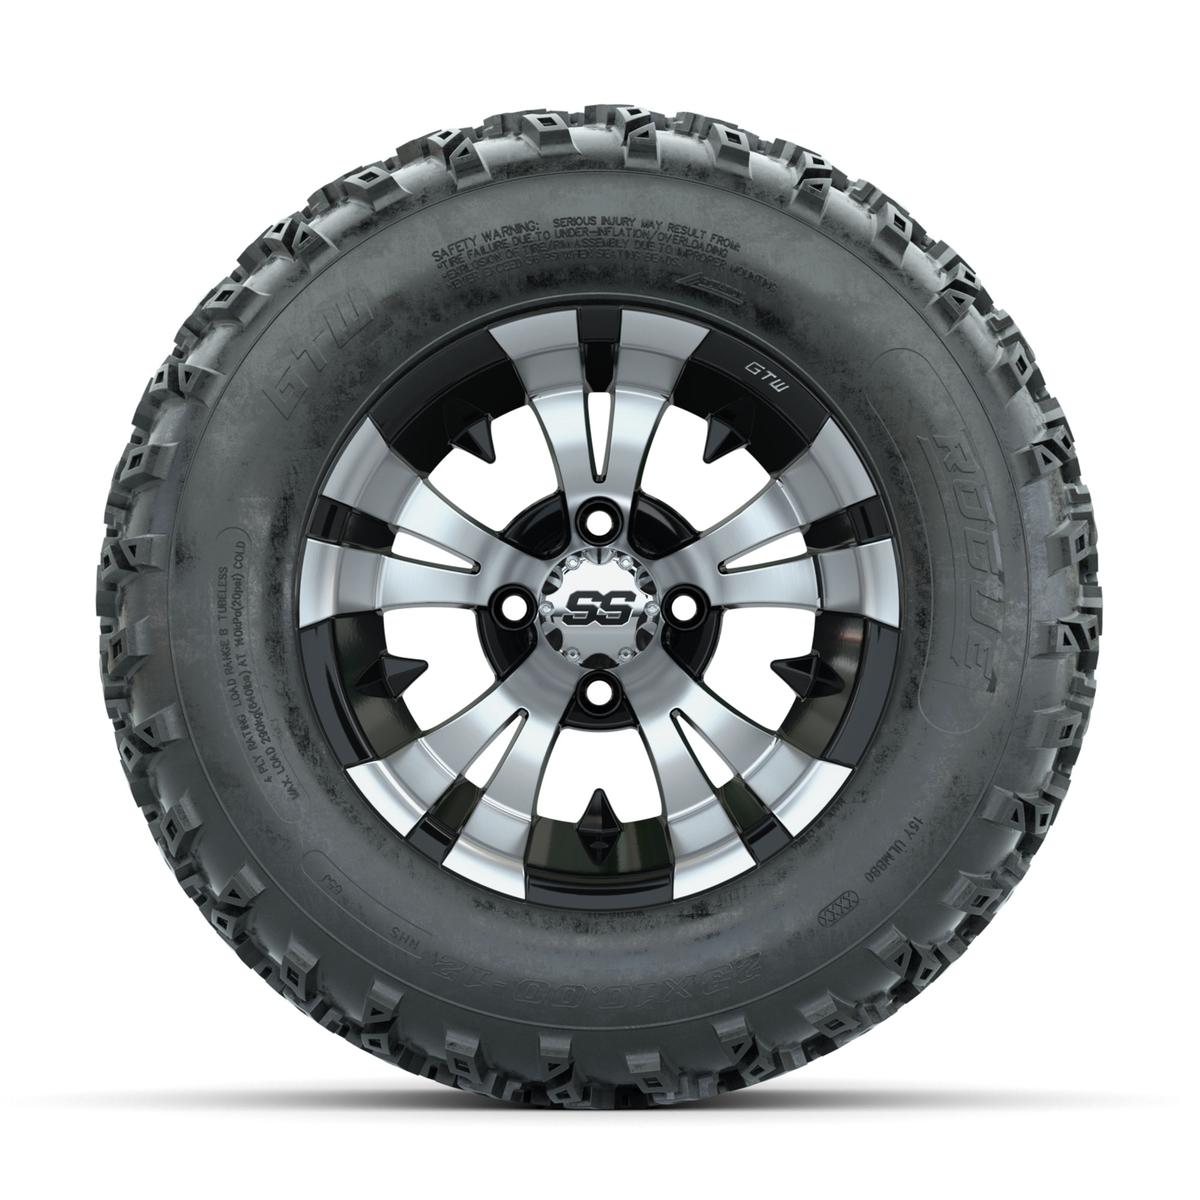 GTW Vampire Machined/Black 12 in Wheels with 23x10.00-12 Rogue All Terrain Tires – Full Set